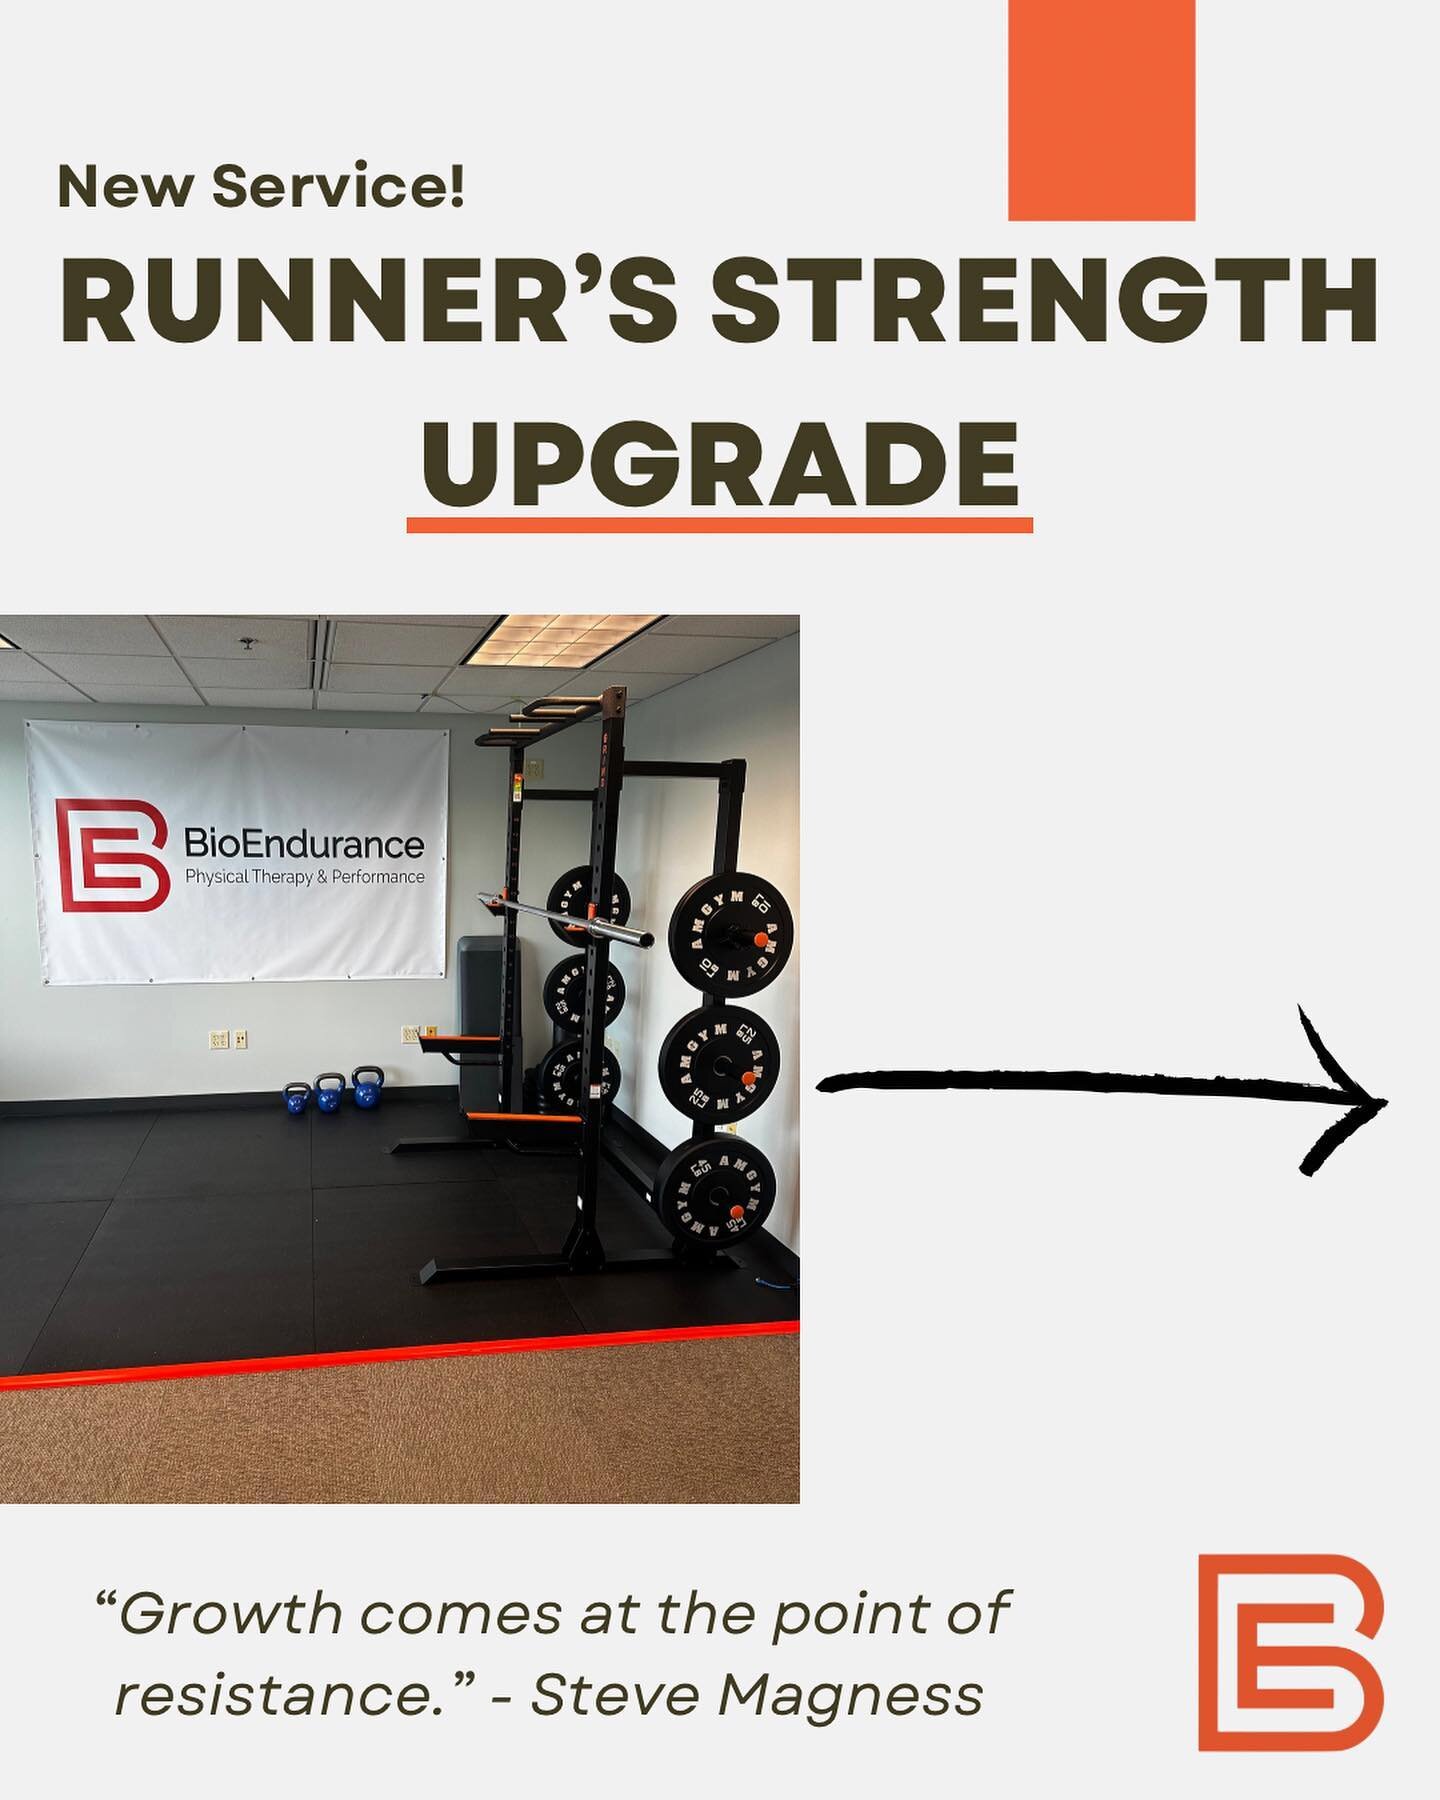 New Service Announcement! Runner&rsquo;s Strength Upgrade! 💪

This is a program designed for runners to upgrade their strength training routine. 🏃&zwj;♂️

5 Sessions. 1-on-1 attention. Each focused on a different aspect of strength training for run